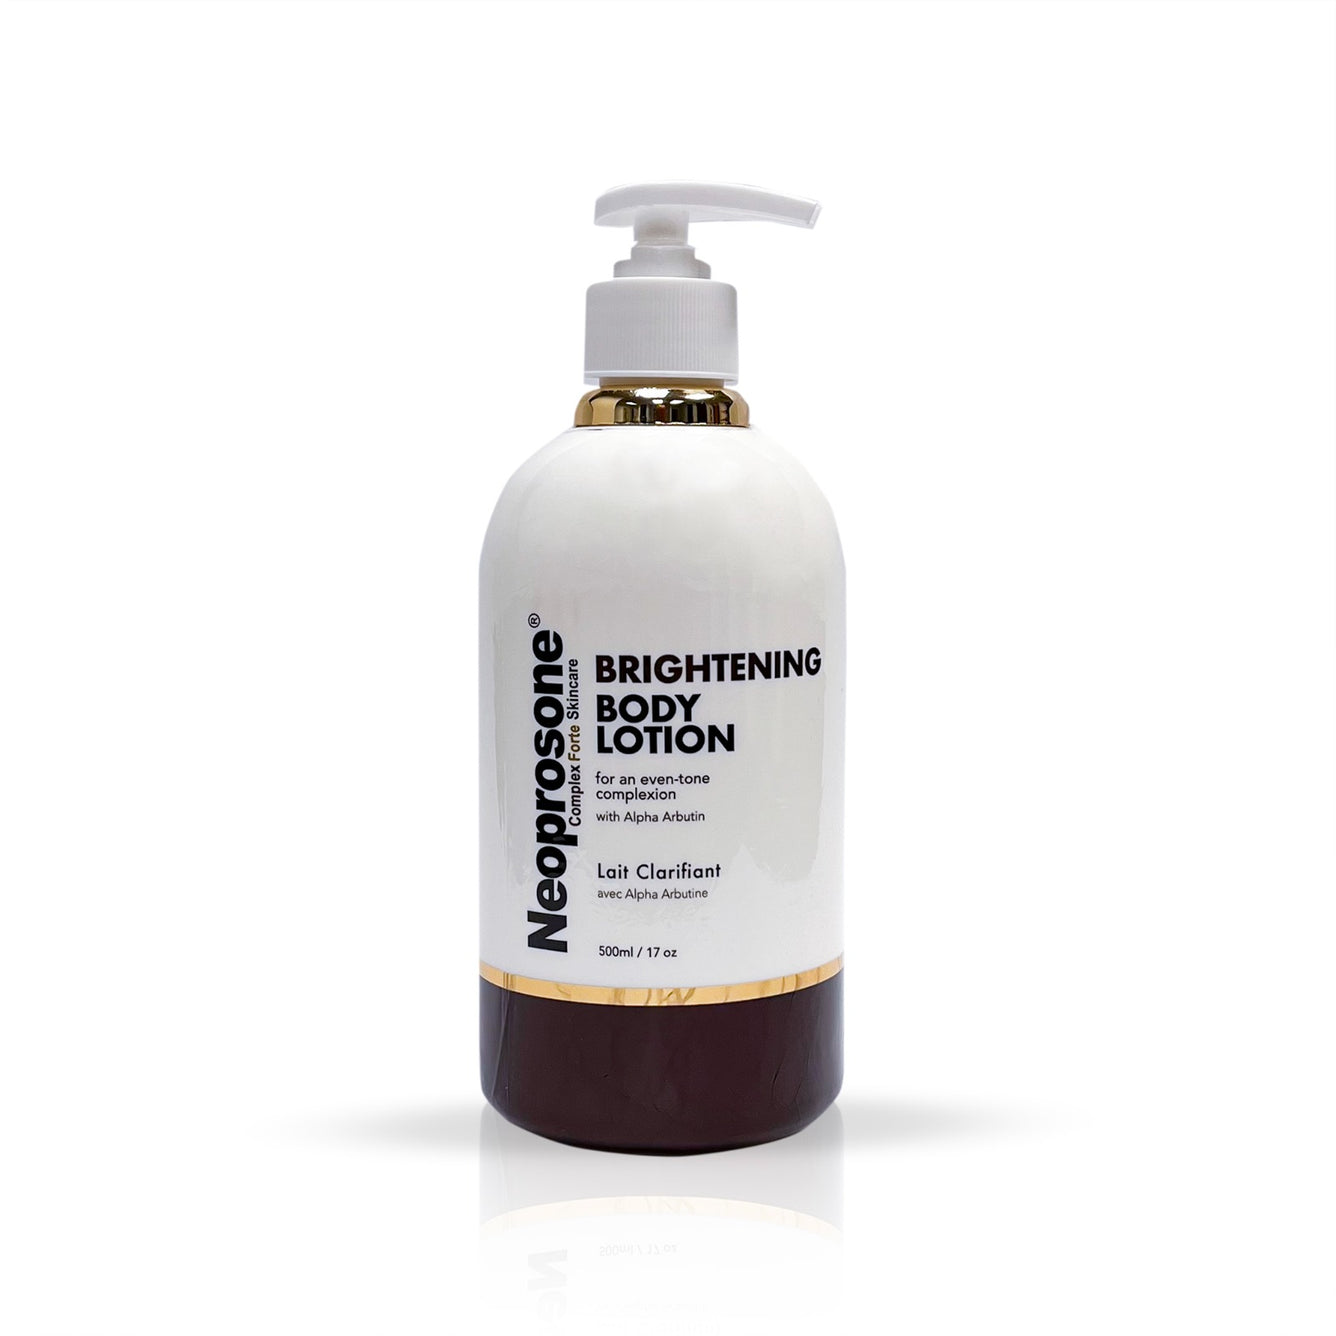 Neoprosone Brightening Body Lotion with Pump – 400ml / 13.5 oz Neoprosone Technopharma - Mitchell Brands - Skin Lightening, Skin Brightening, Fade Dark Spots, Shea Butter, Hair Growth Products